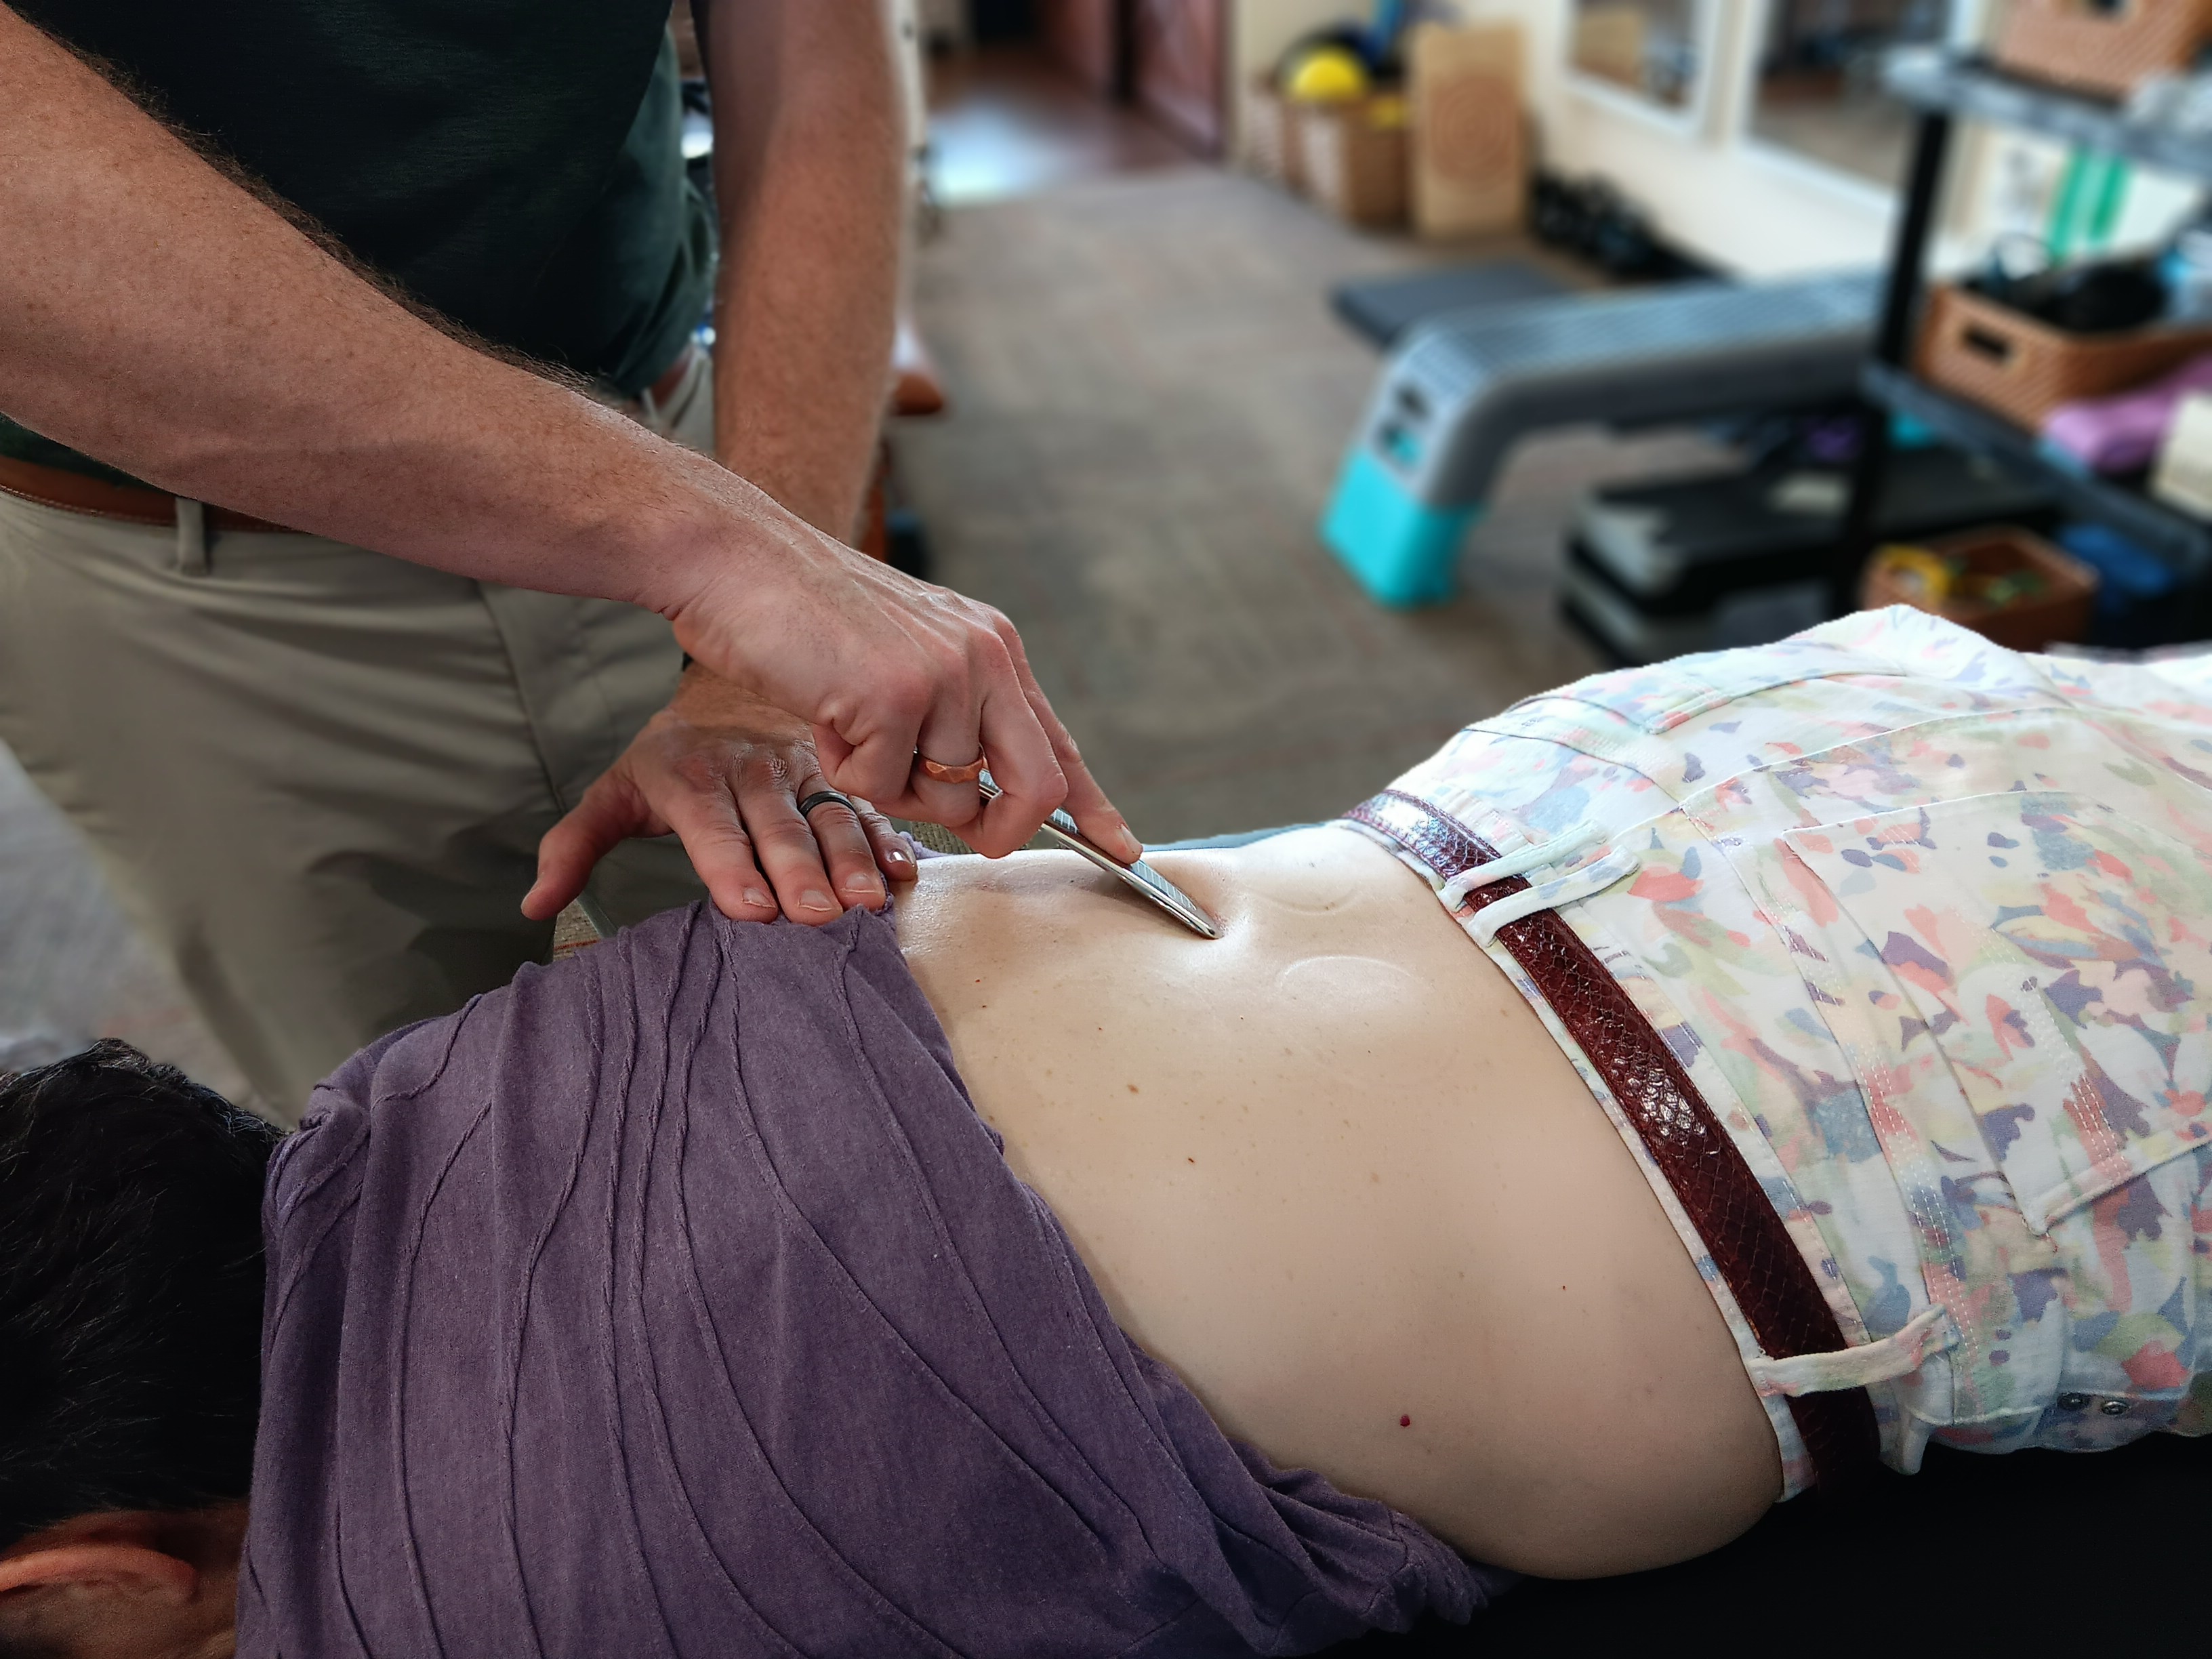 Instrument assisted soft tissue mobilization for low back pain relief.